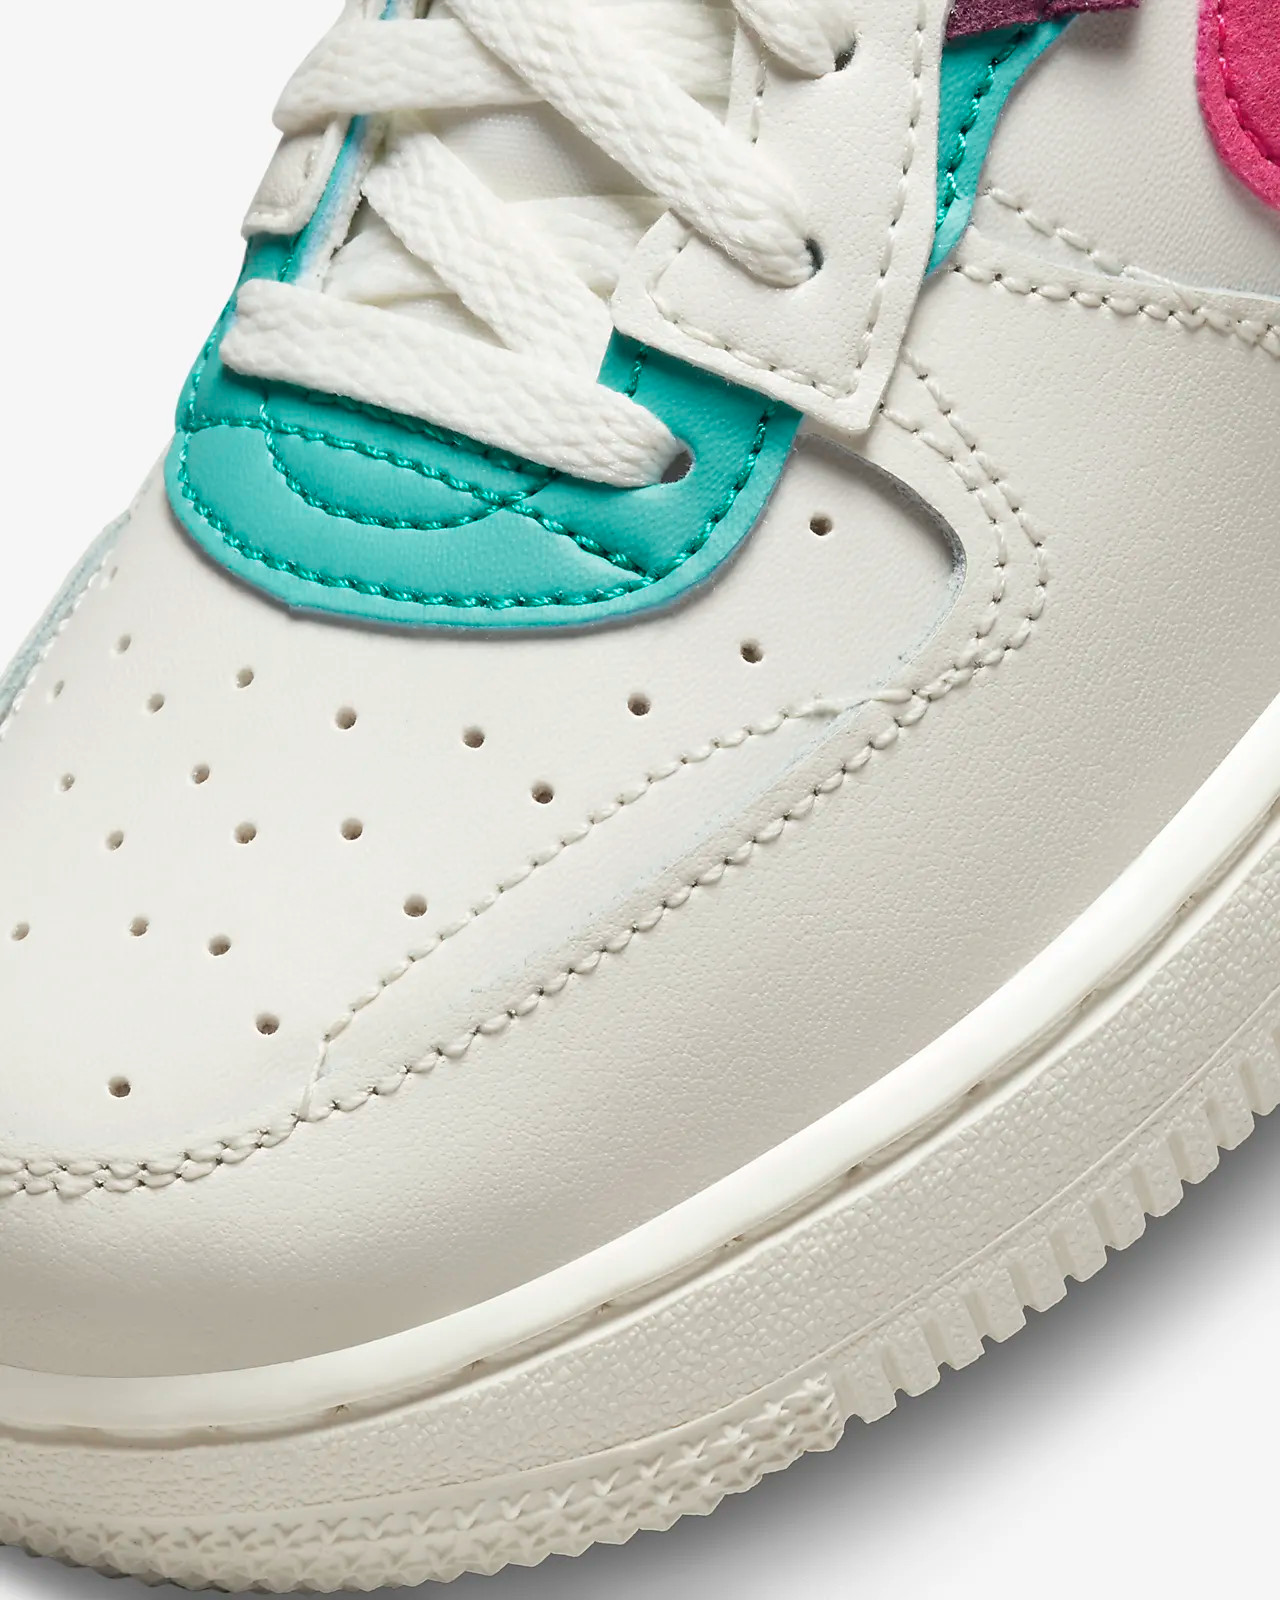 teal and pink air force 1